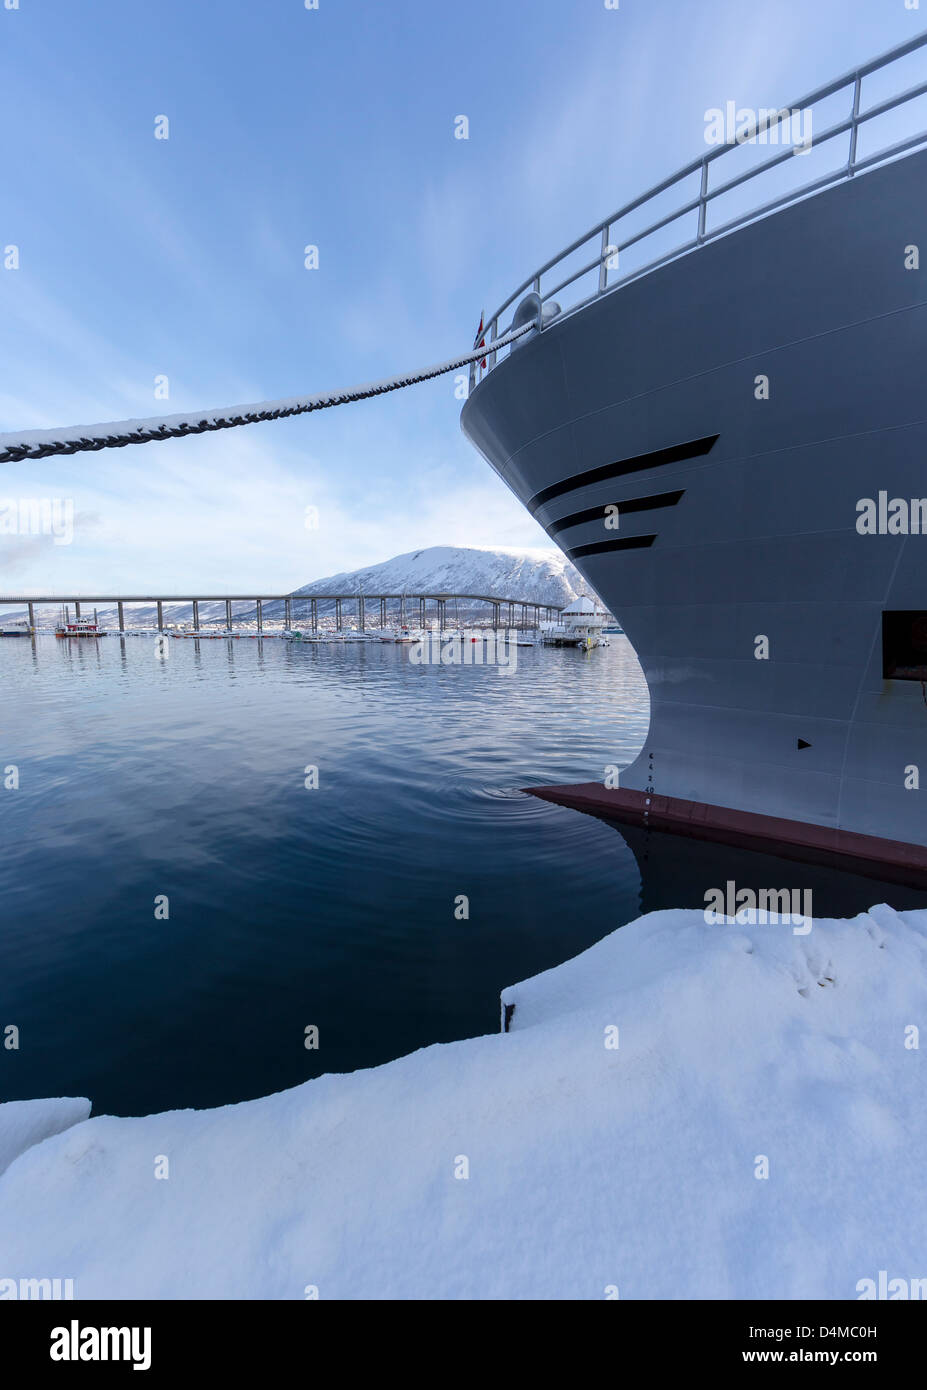 A view towards Tromso Bridge with part of a snow-covered wharf and the bows of a moored ship framing the picture. Stock Photo